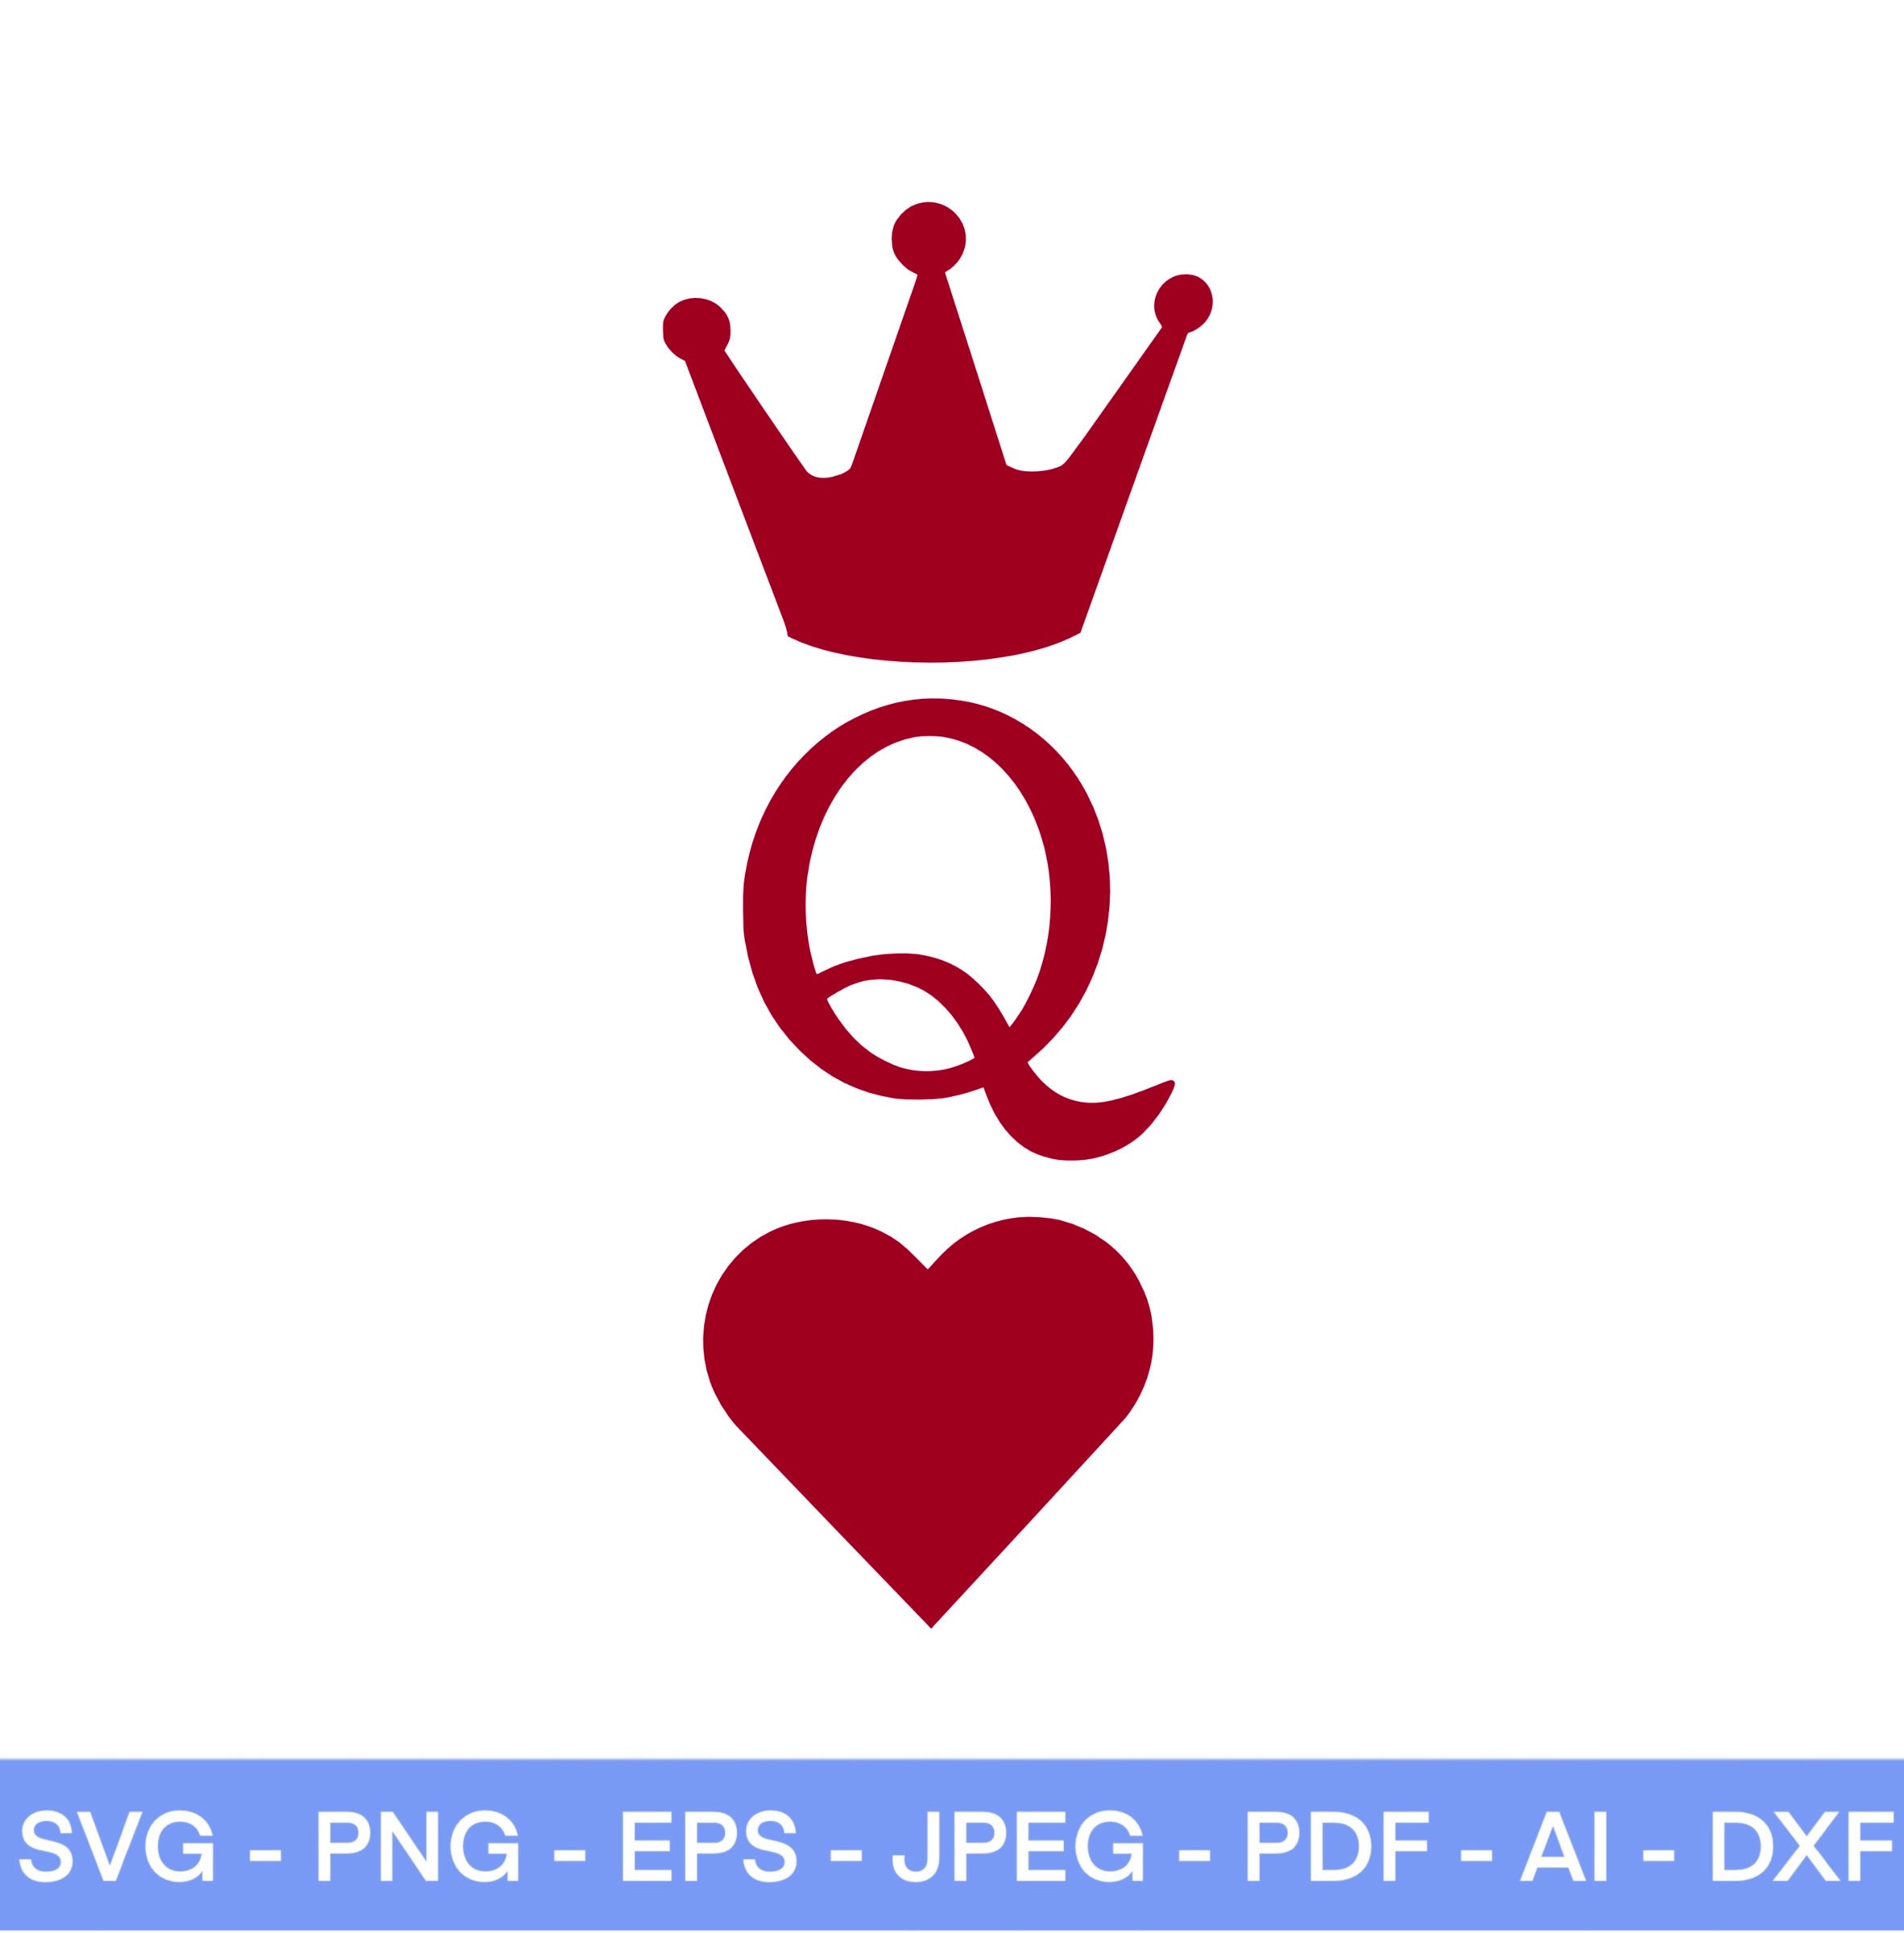 Queen of Hearts Svg Queen SVG Crown Svg EPS PNG Jpeg Etsy